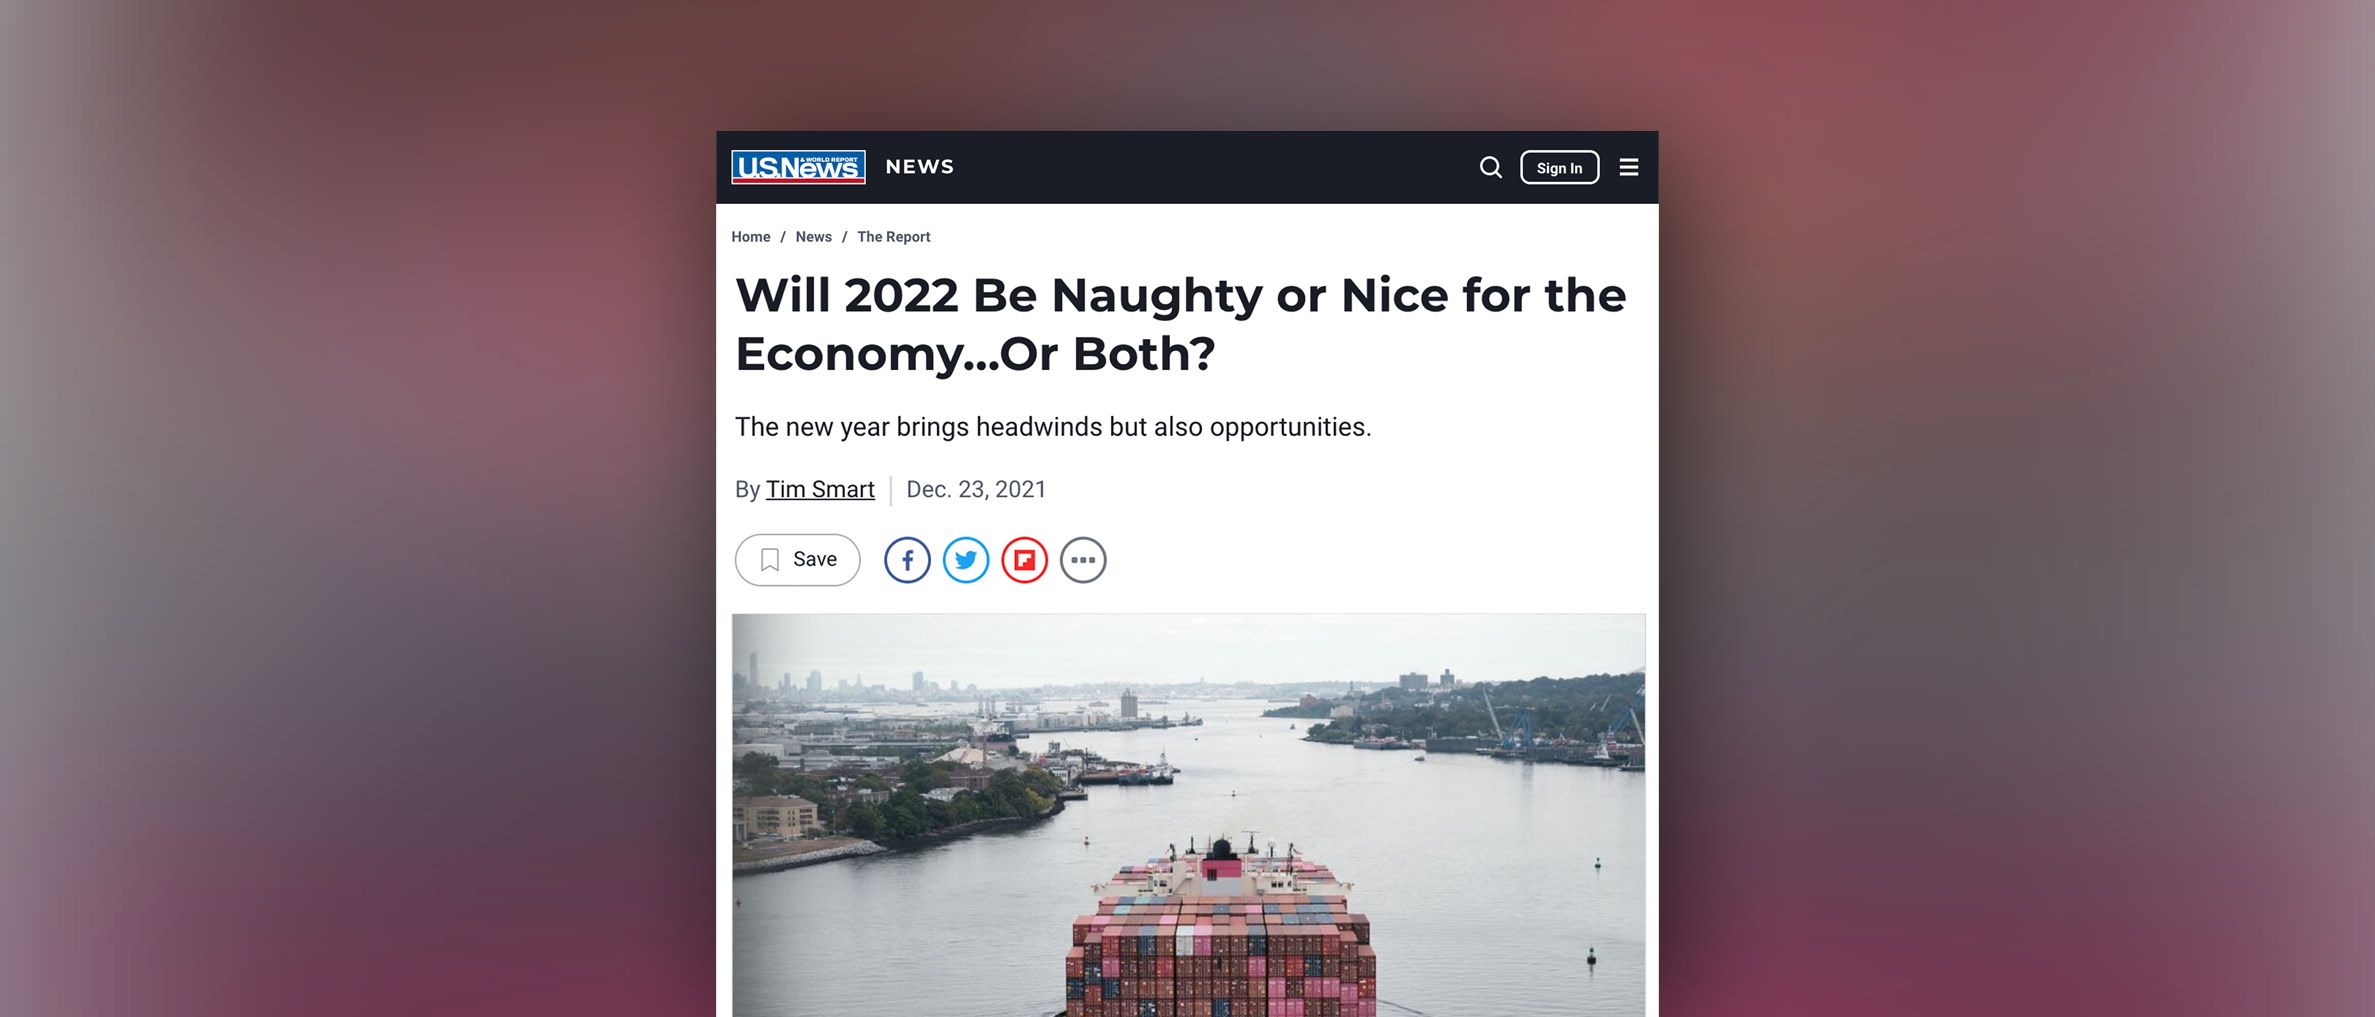 US News: Will 2022 Be Naughty or Nice for the Economy…Or Both?